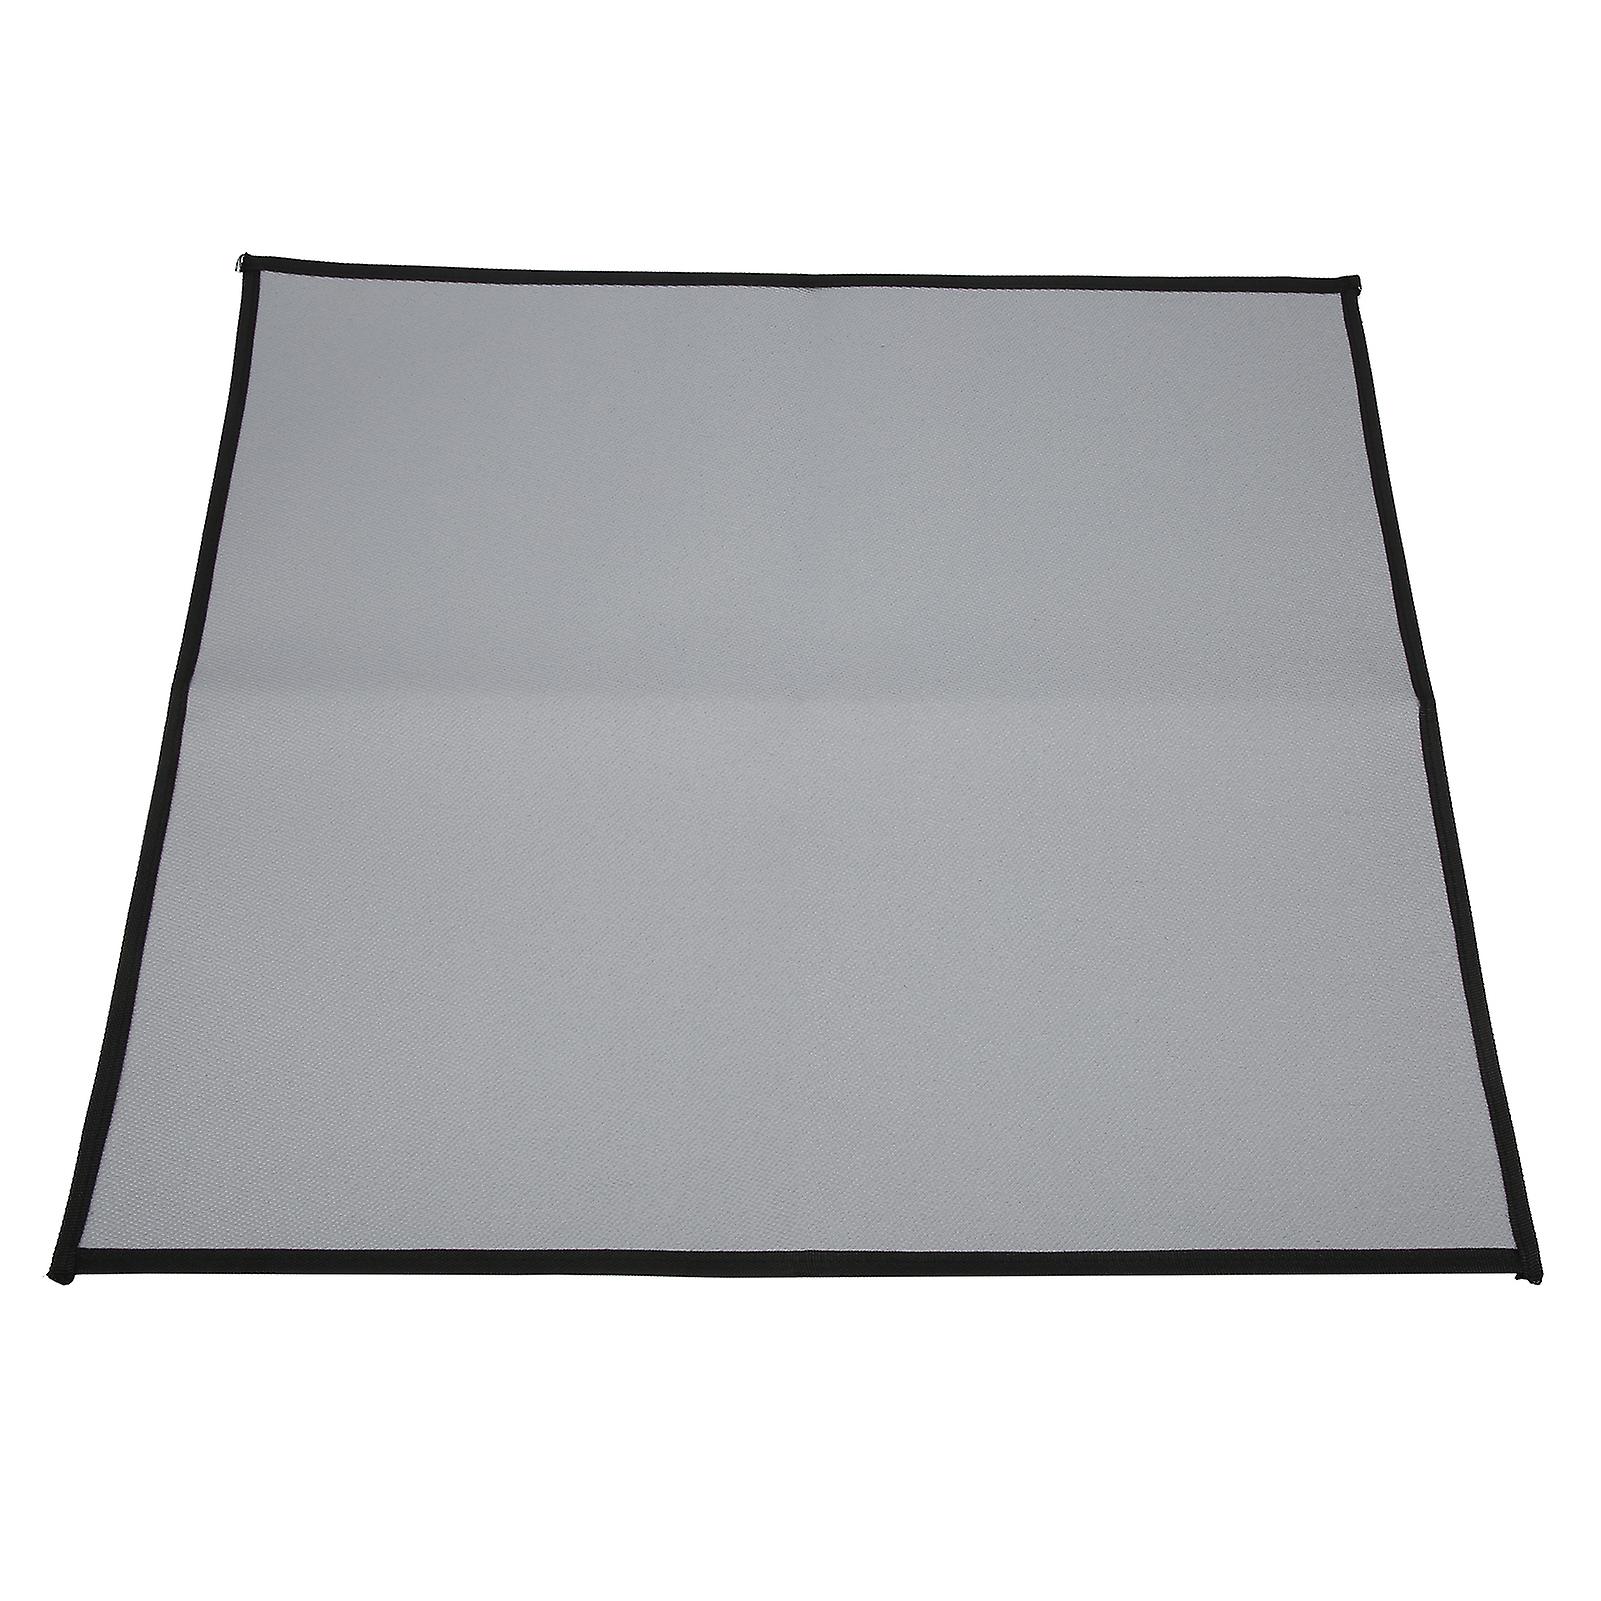 60x53cm Rectangular Fire Pit Pad Grill Mats Deck Protector Portable Silicone Camping Fireproof Cloth